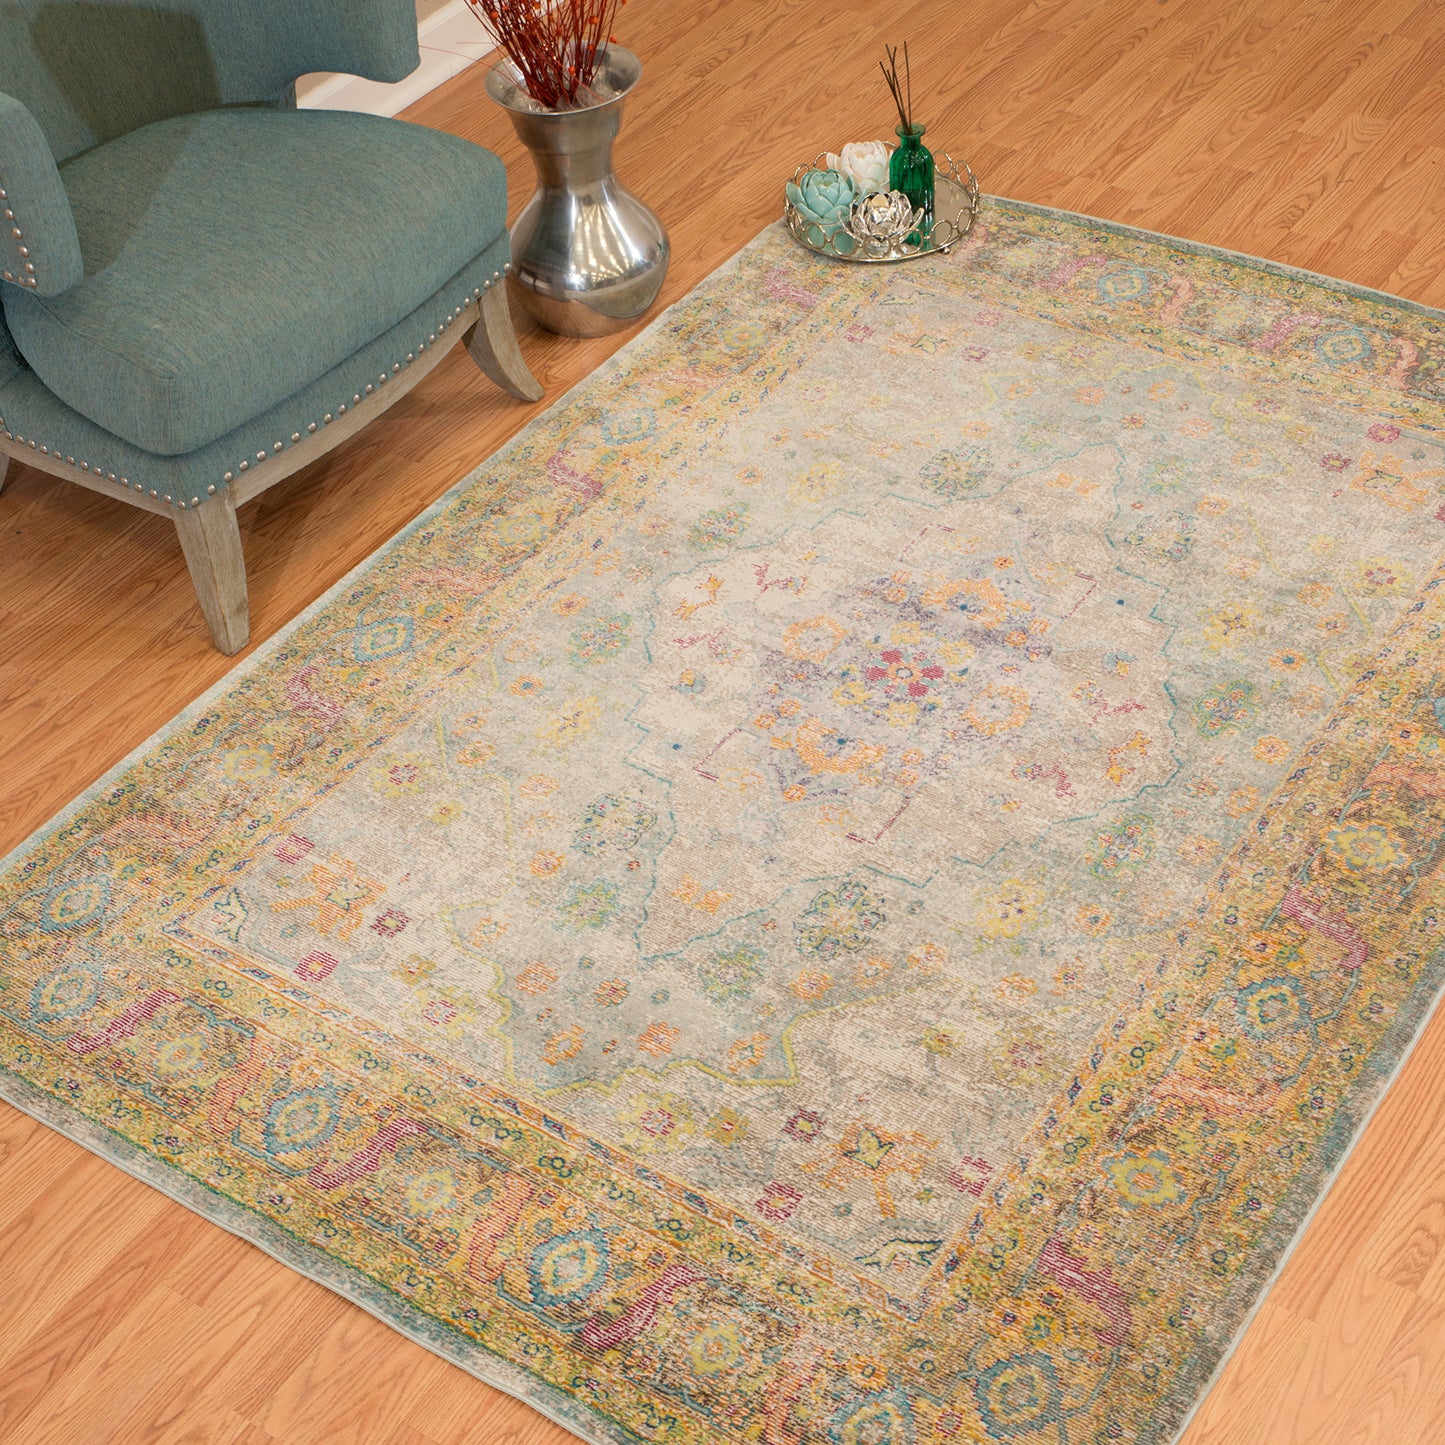 1830-Bromley Synthetic Blend Indoor Area Rug by United Weavers